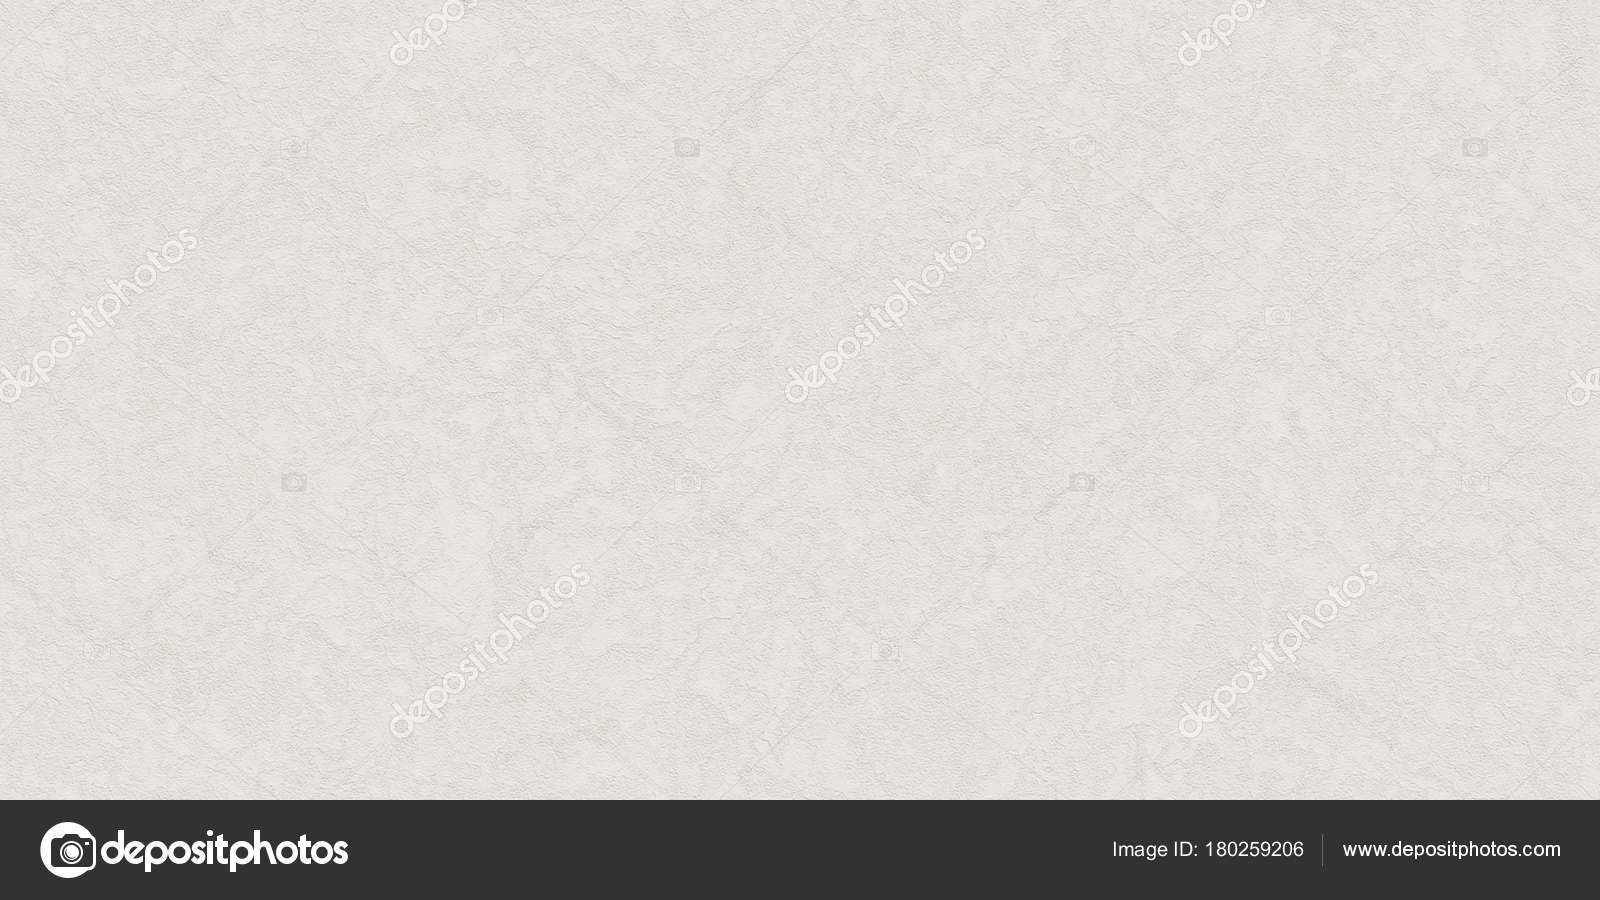  Hard  Pressed Art Paper  Seamless Texture Blank Page 